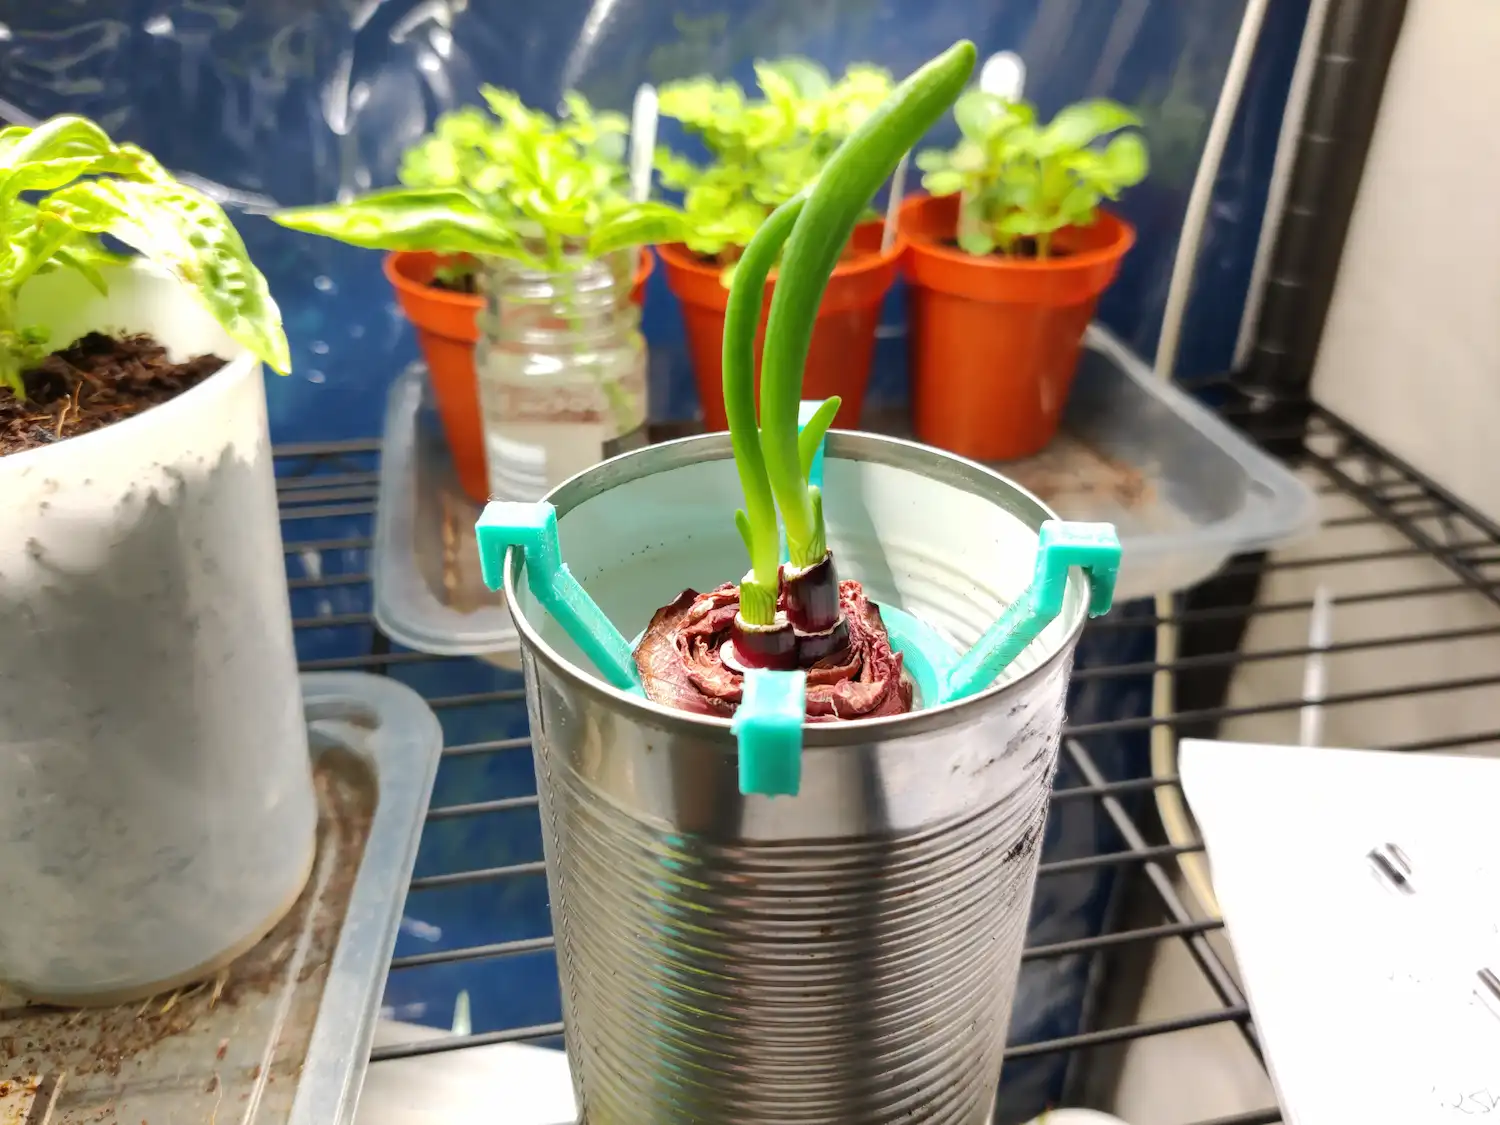 Part of a red onion sprouting in a silver tin can, with the onion held centrally suspended in the can via a green 3d-printed plastic thingy, which hooks to the top of the can